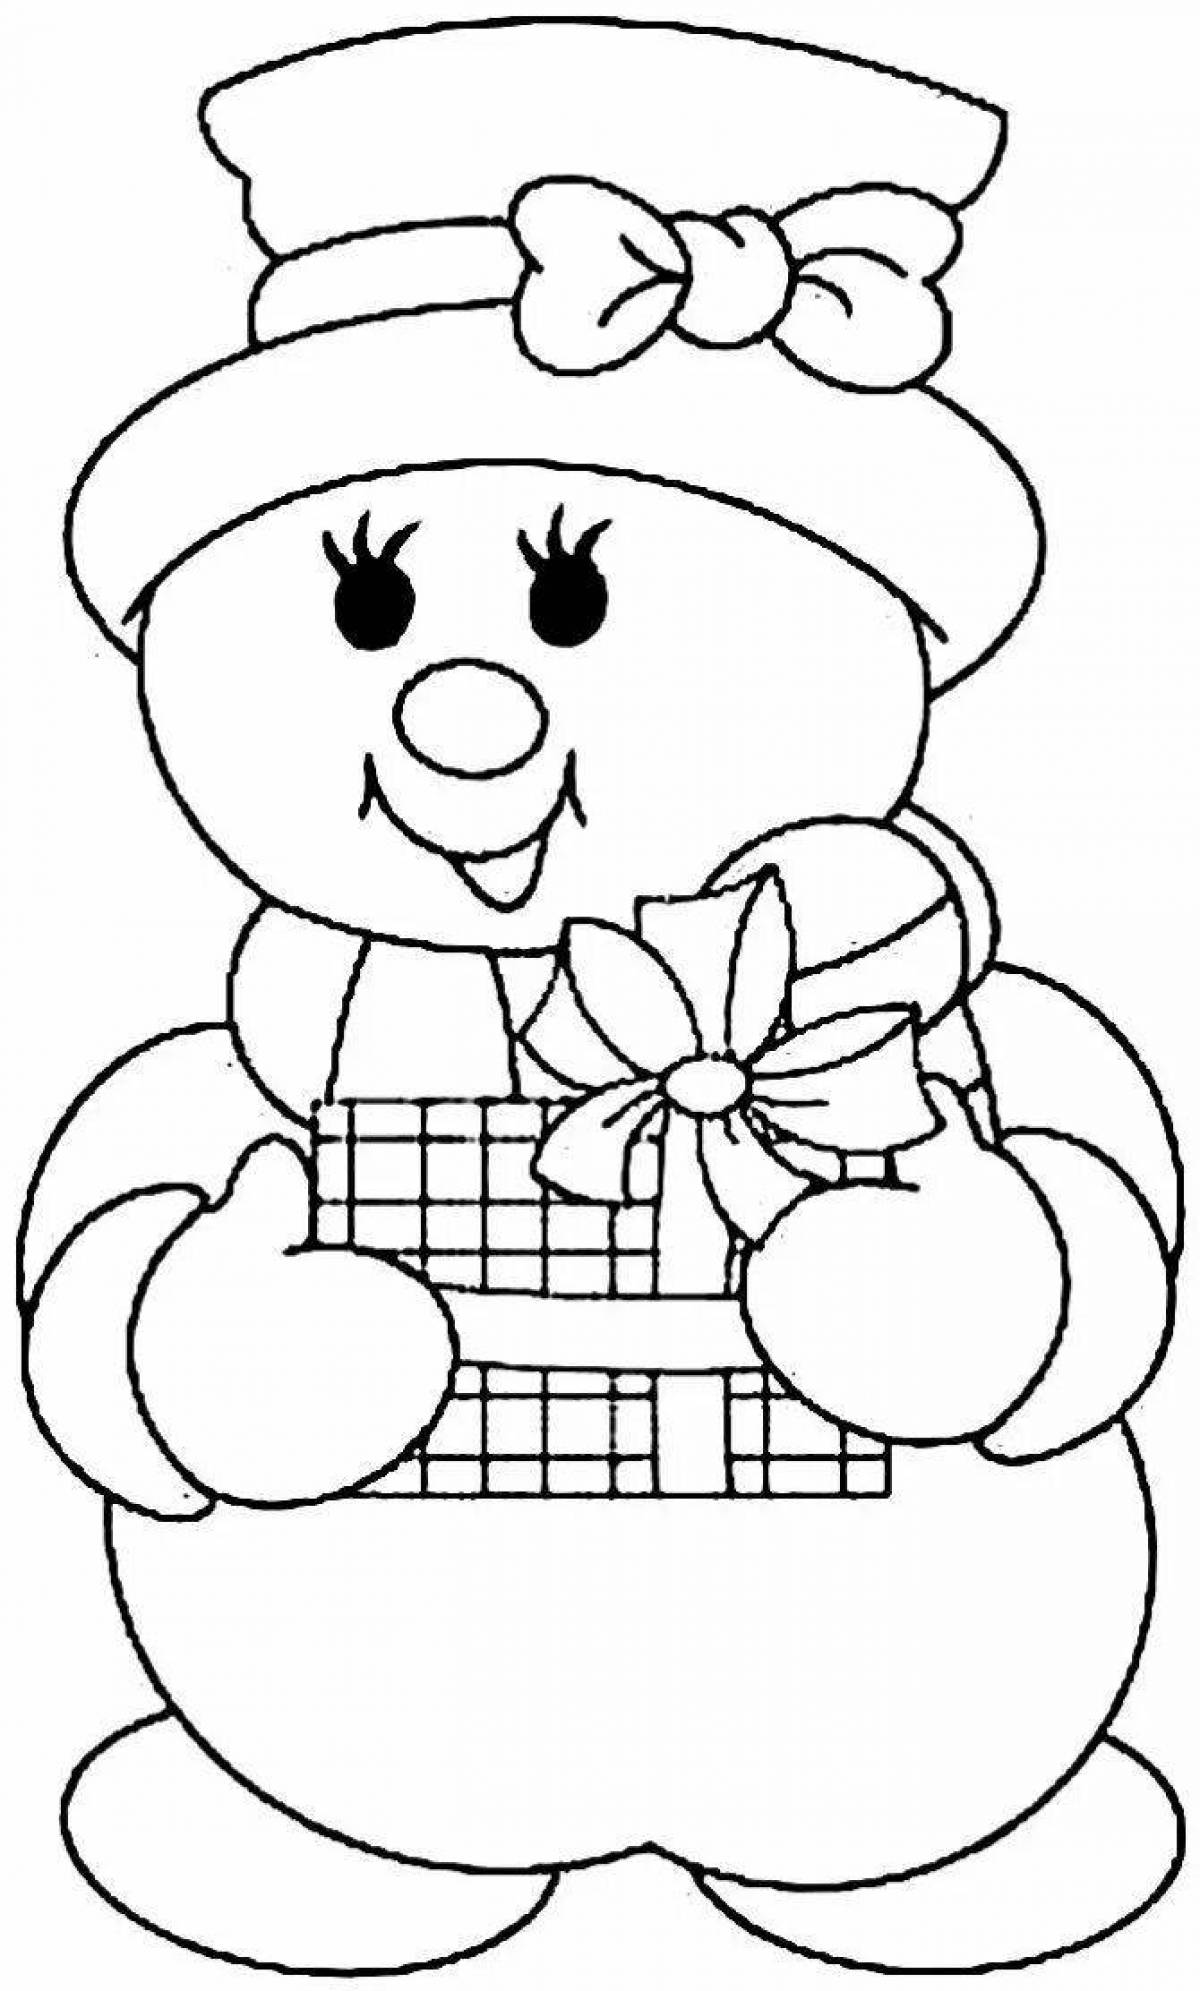 Playful snowman coloring page